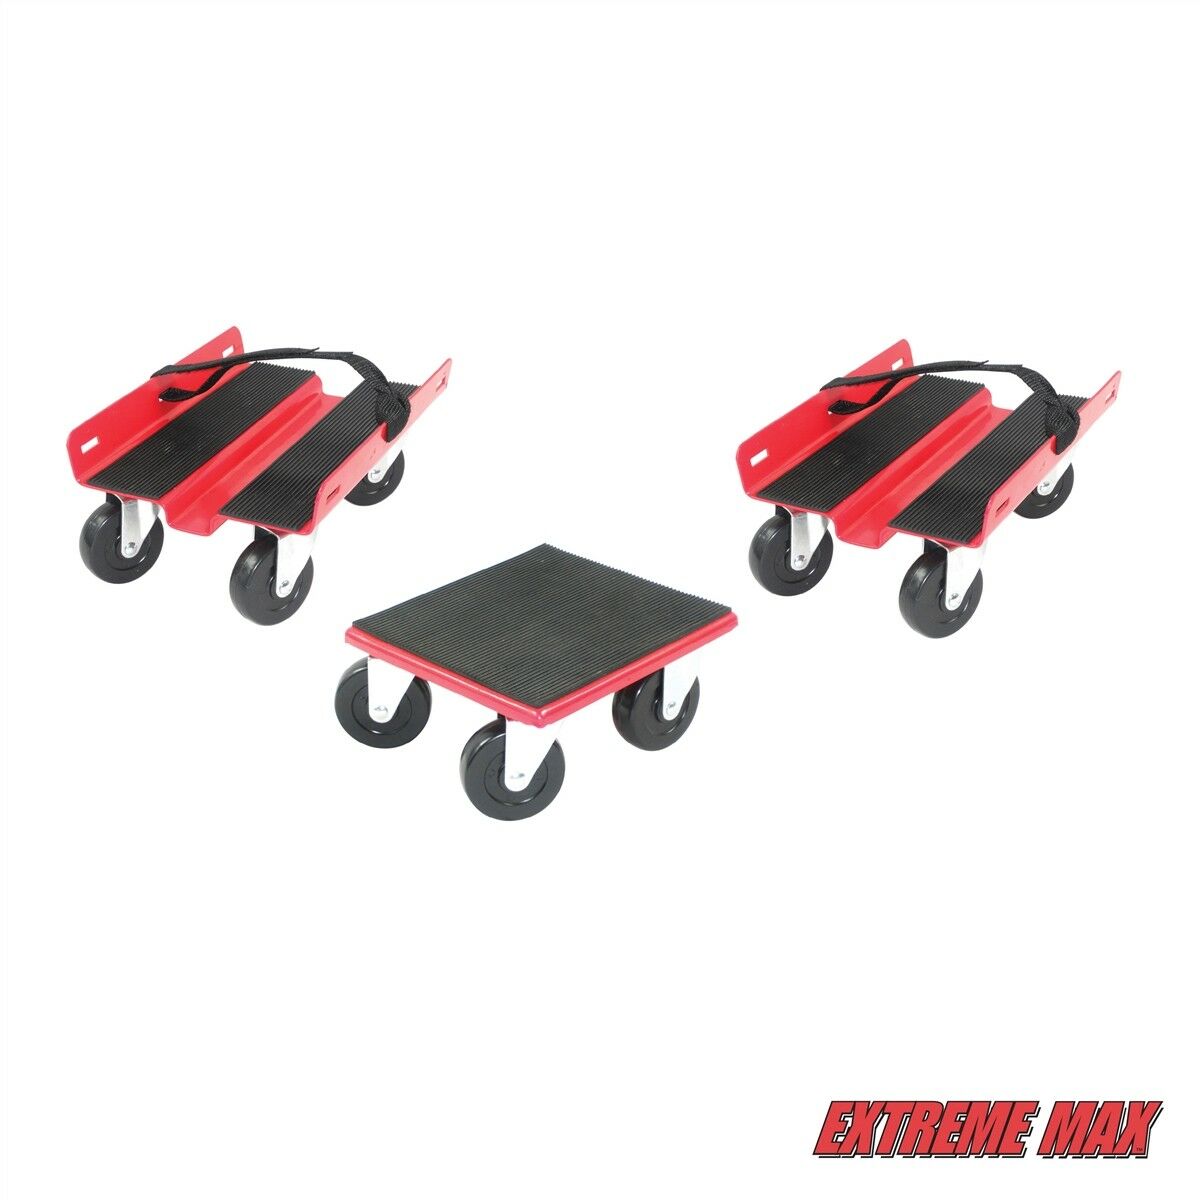 Extreme Max 5800.2000 Economy Snowmobile Dolly - Red Steel (3pc Set)